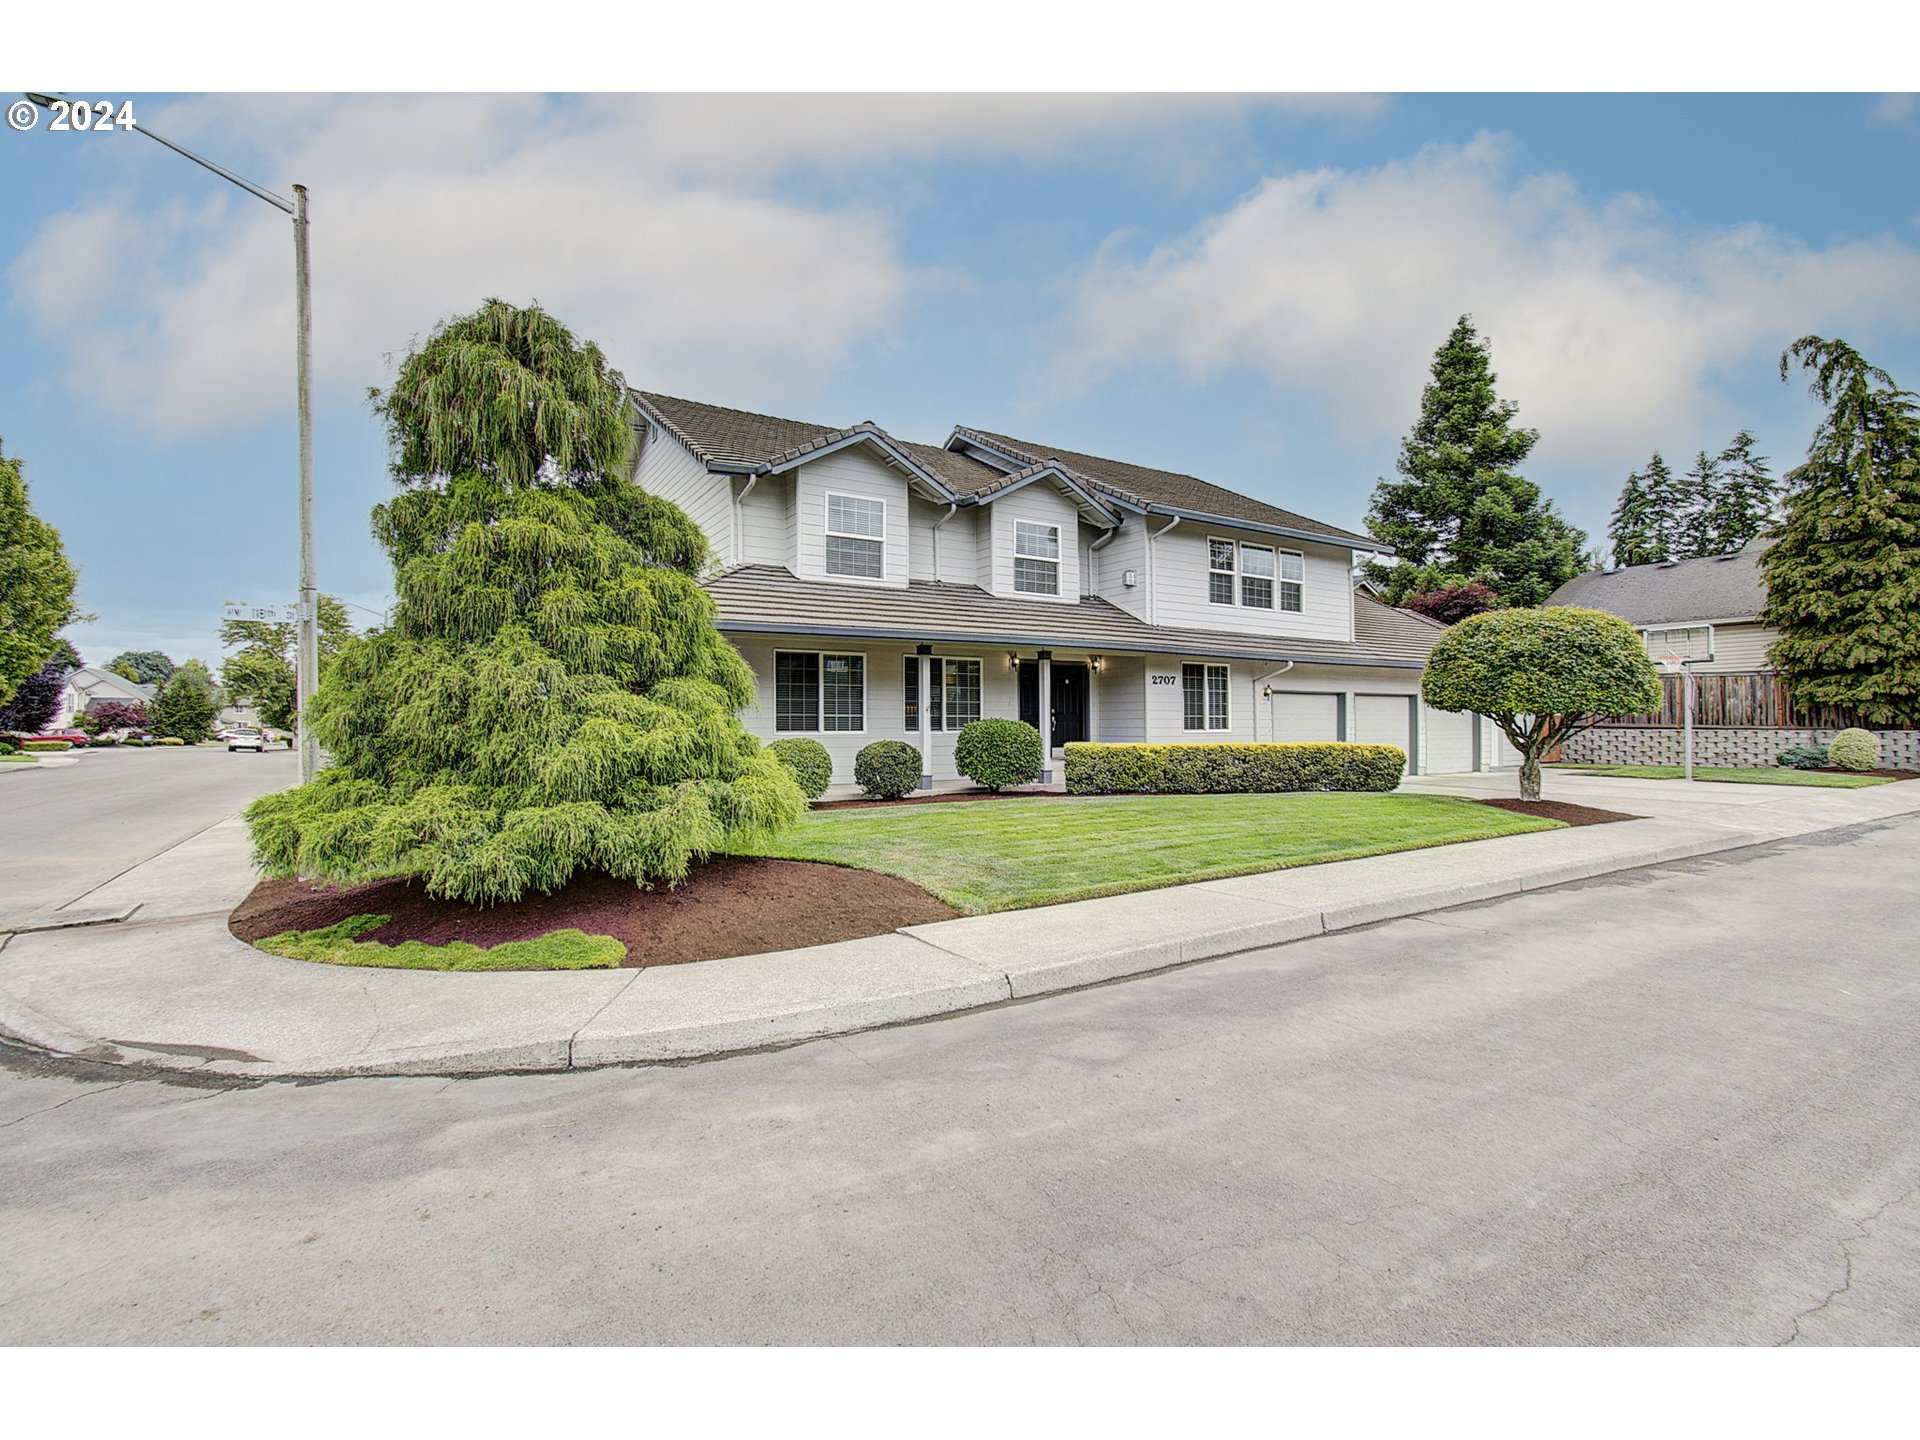 2707 NW 118th St, Vancouver, WA 98685